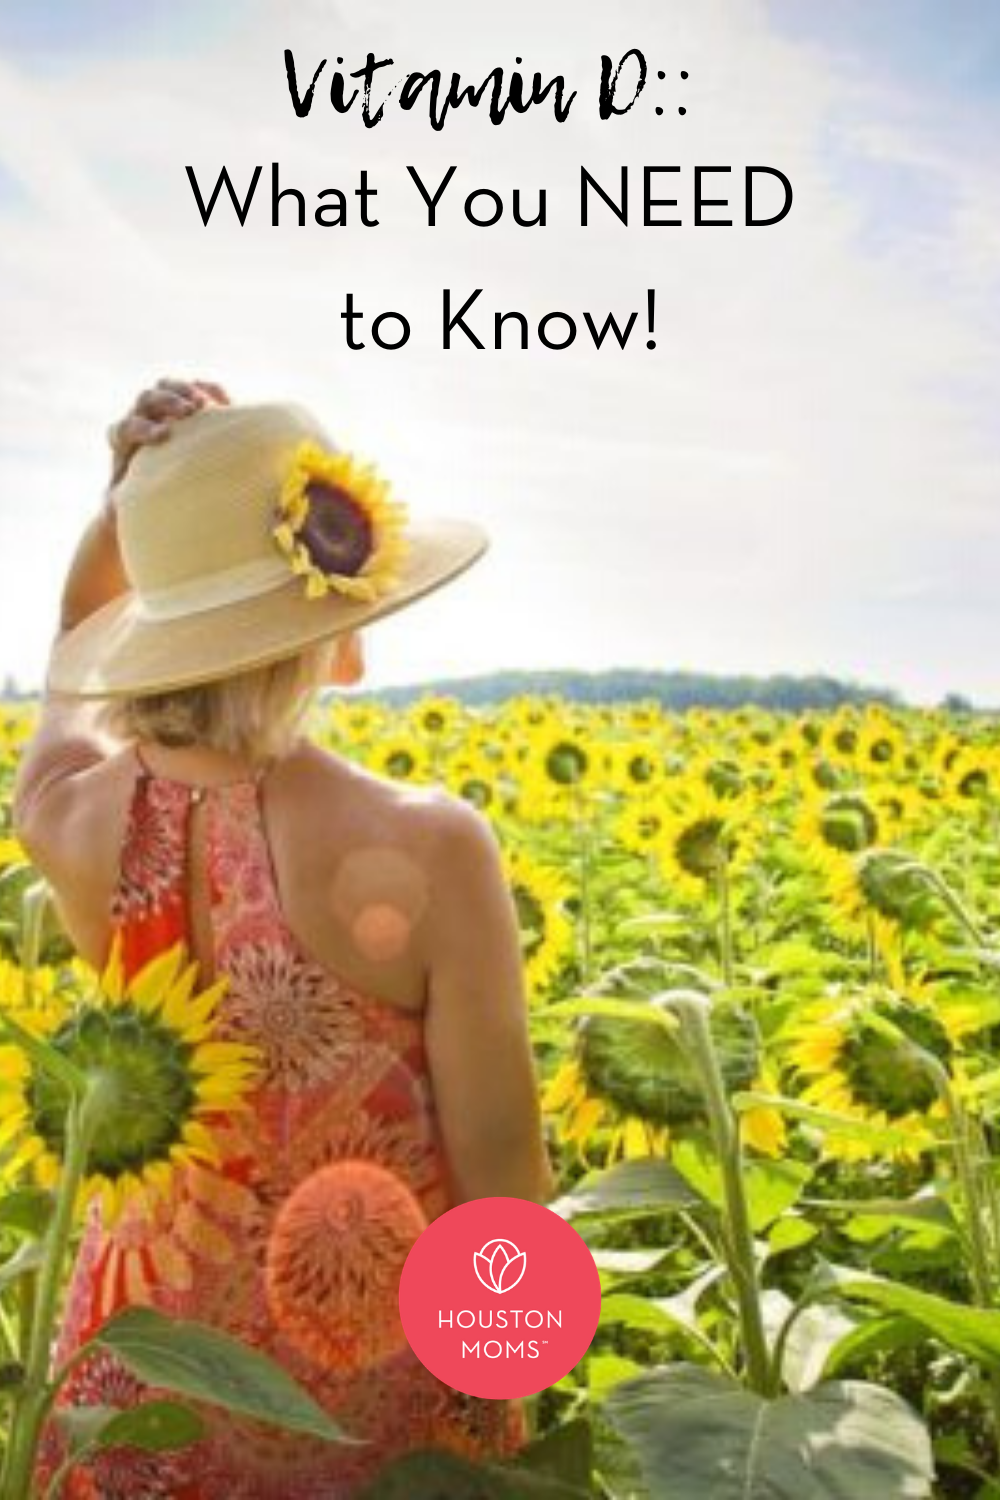 Houston Moms "Vitamin D:: What You NEED to Know!" #houstonmoms #houstonmomsblog #momsaroundhouston